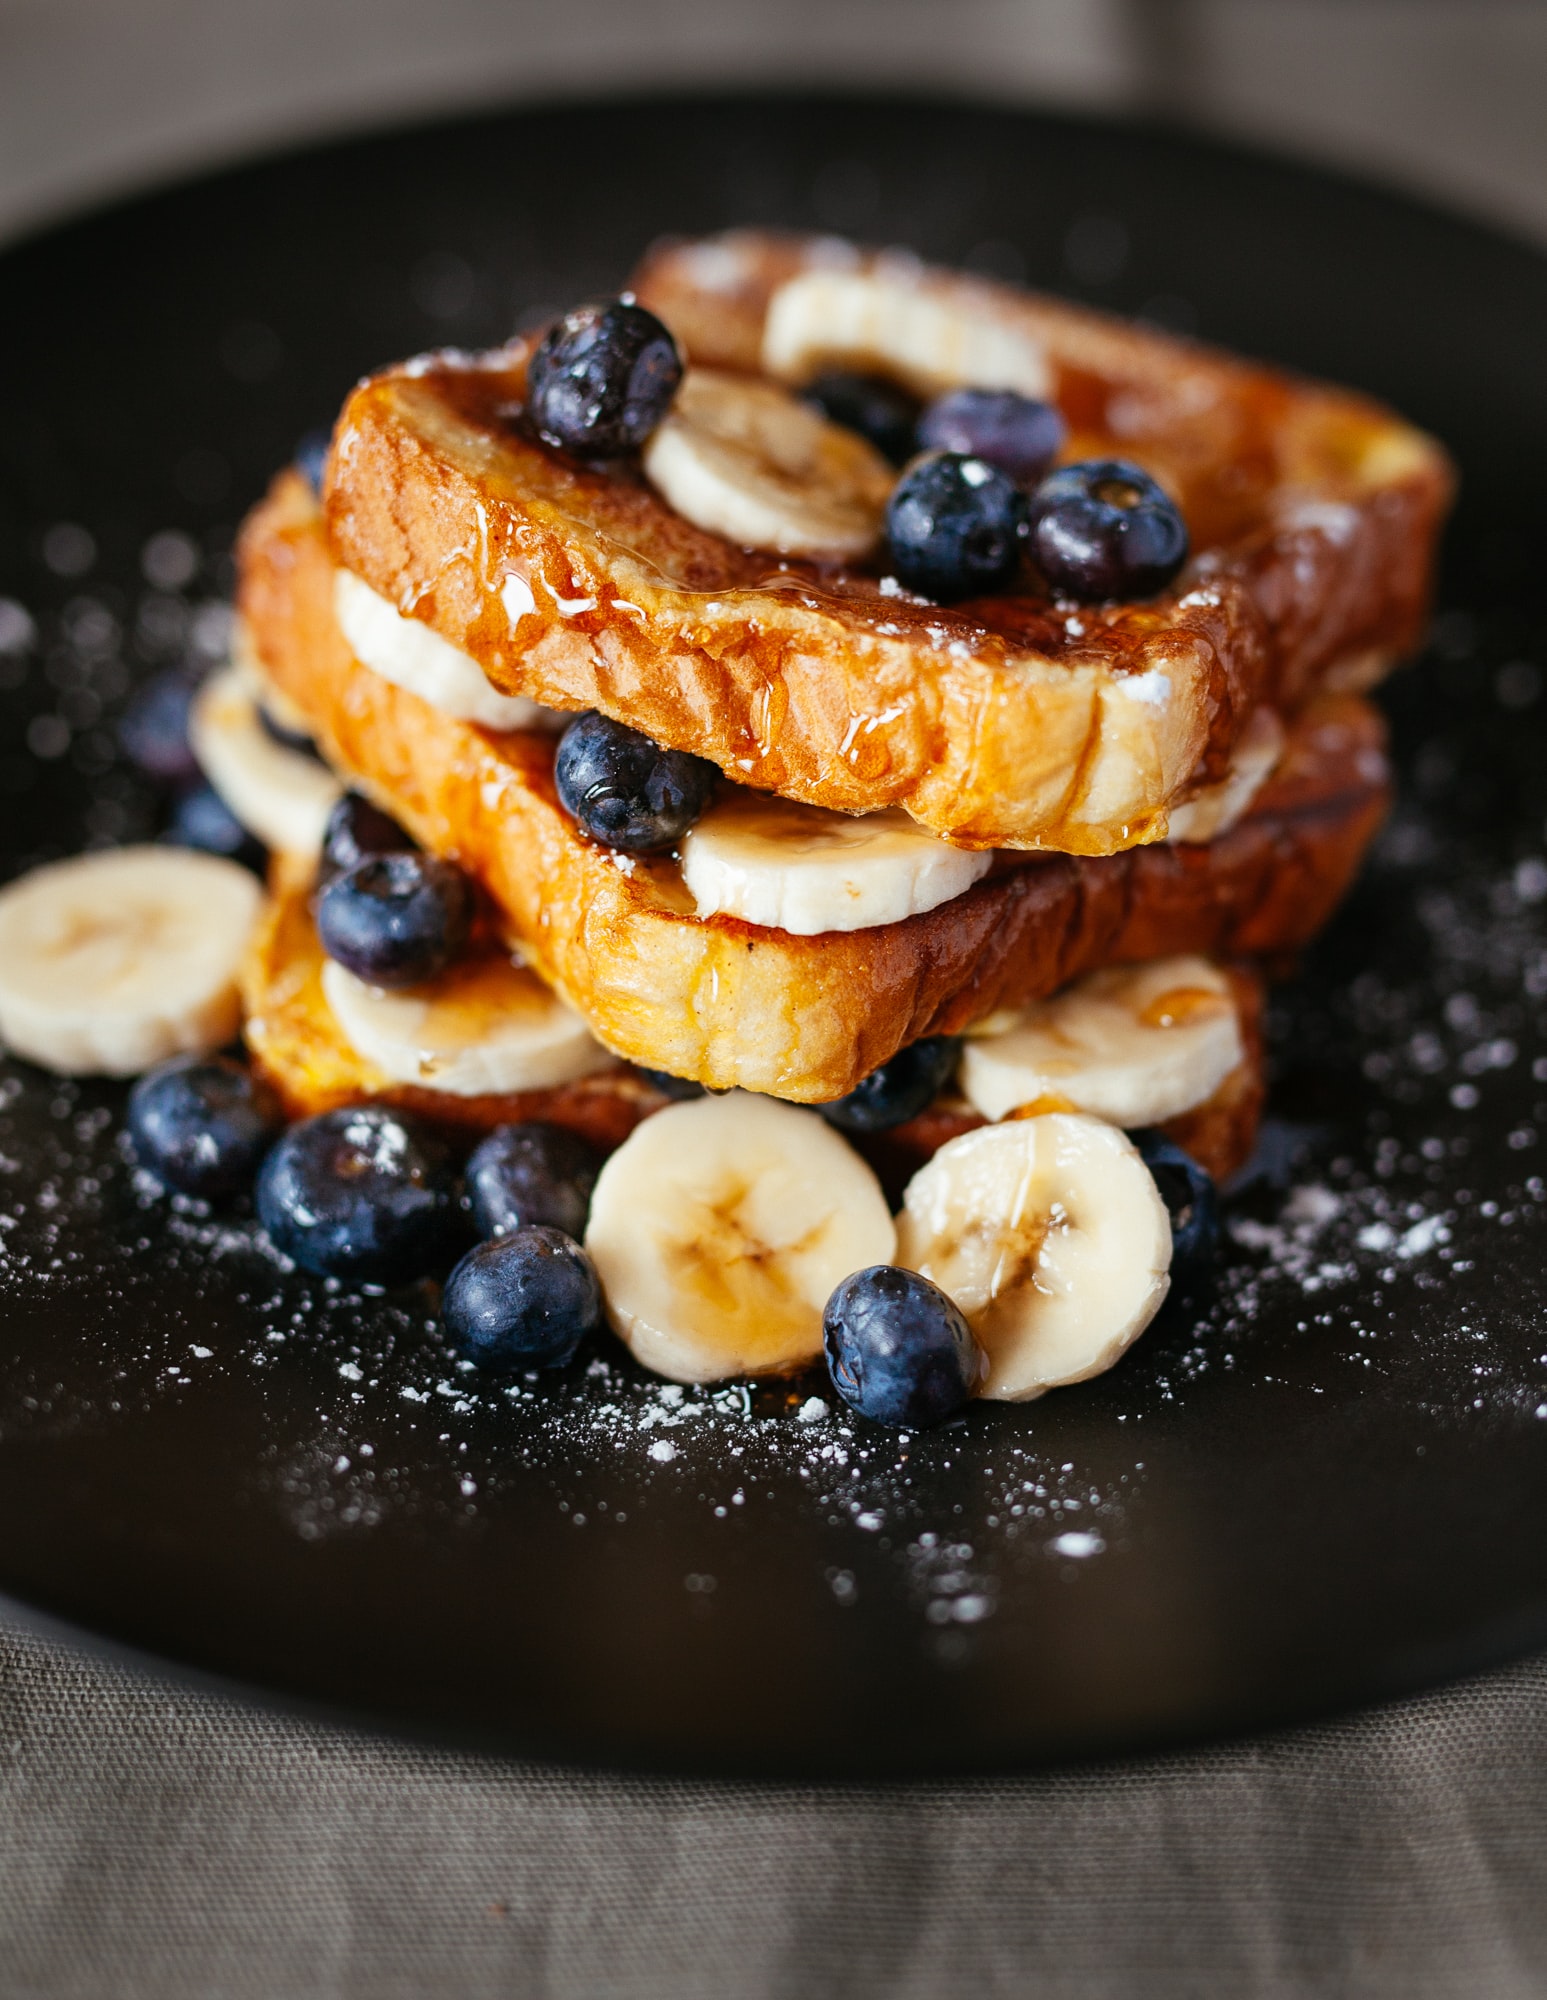 A plate of french toast with blueberry and banana